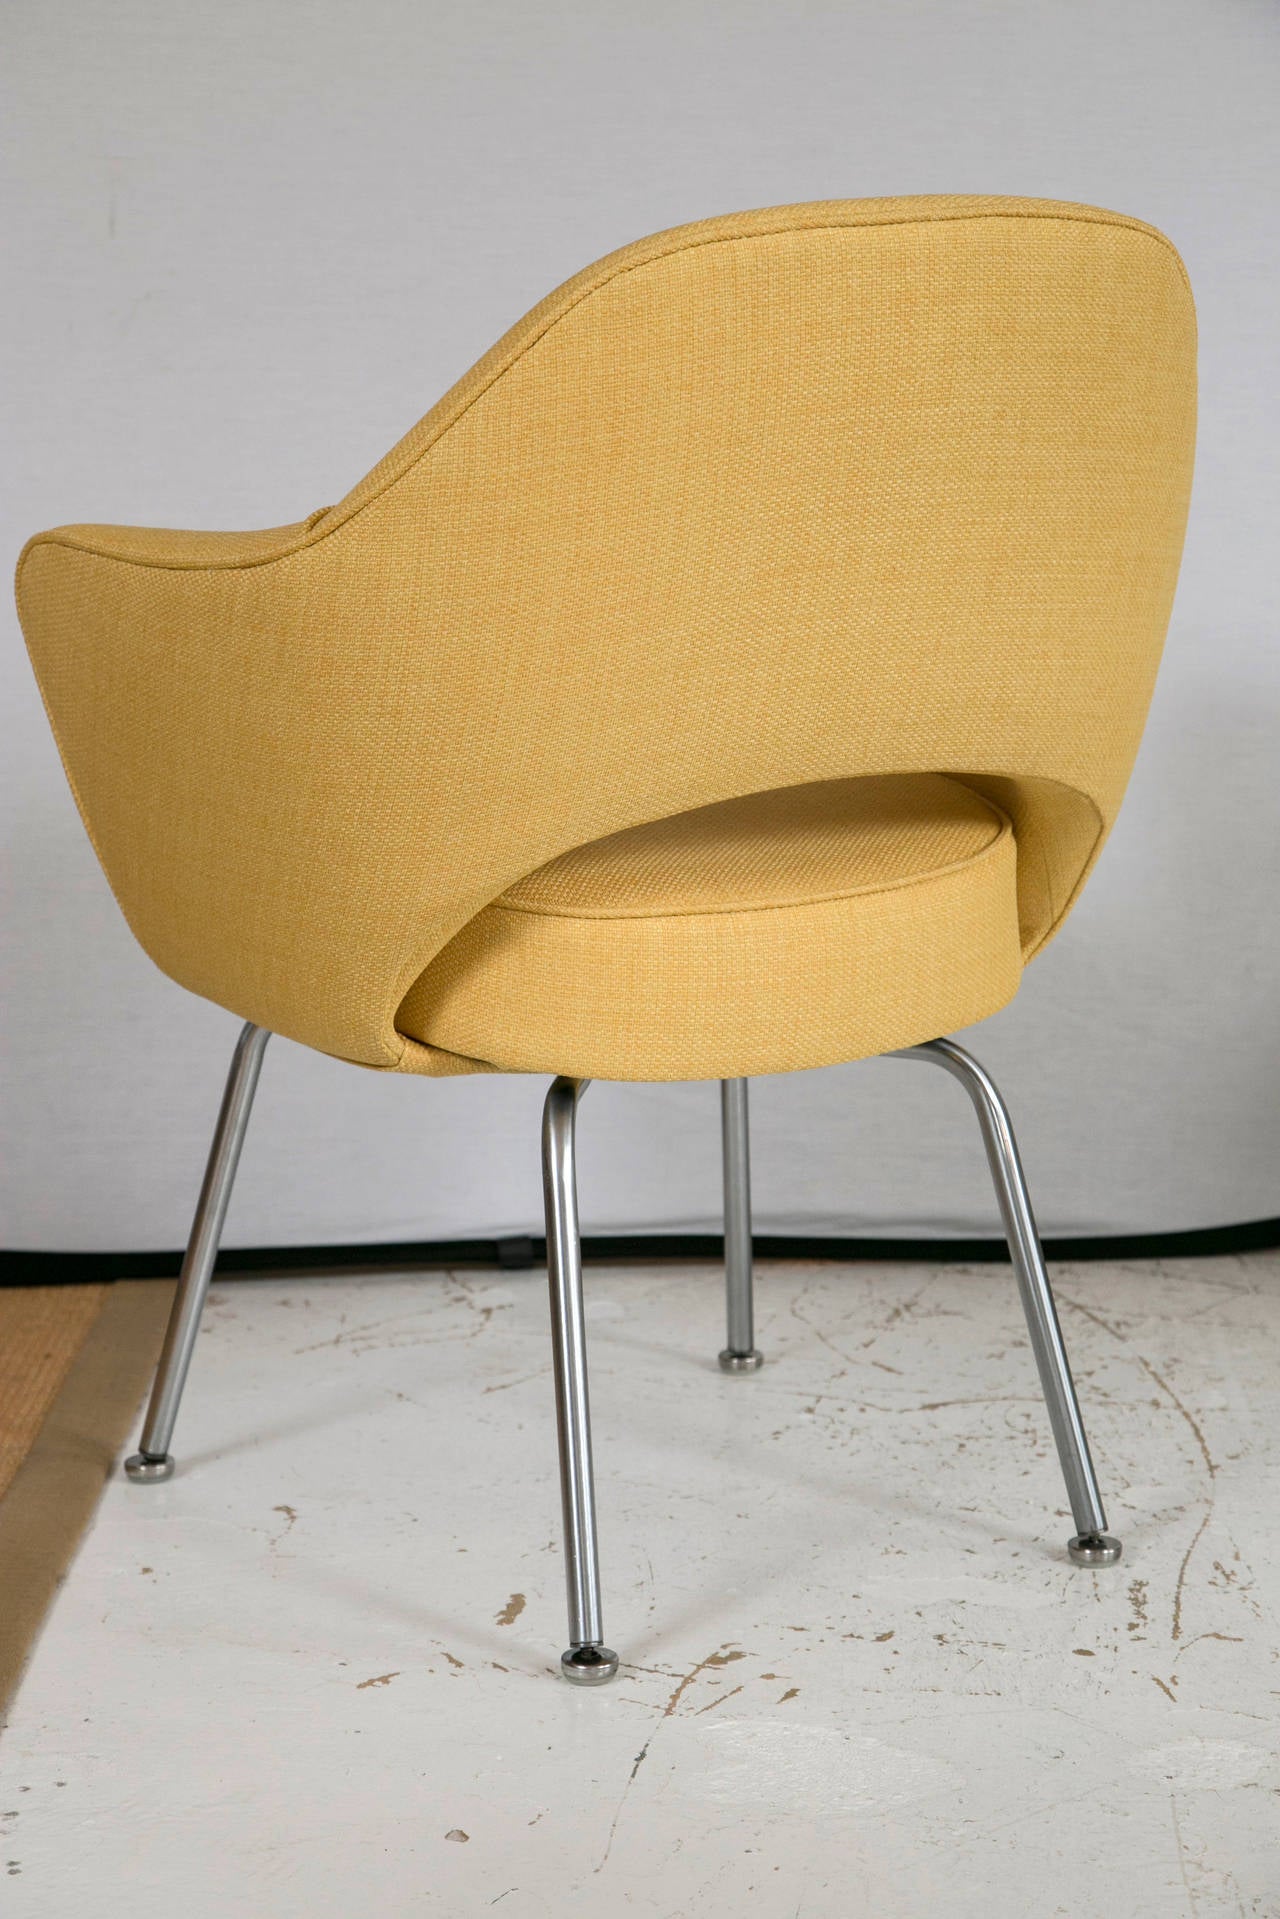 American Saarinen for Knoll Executive Arm Chairs in Yellow Woven-Microfiber